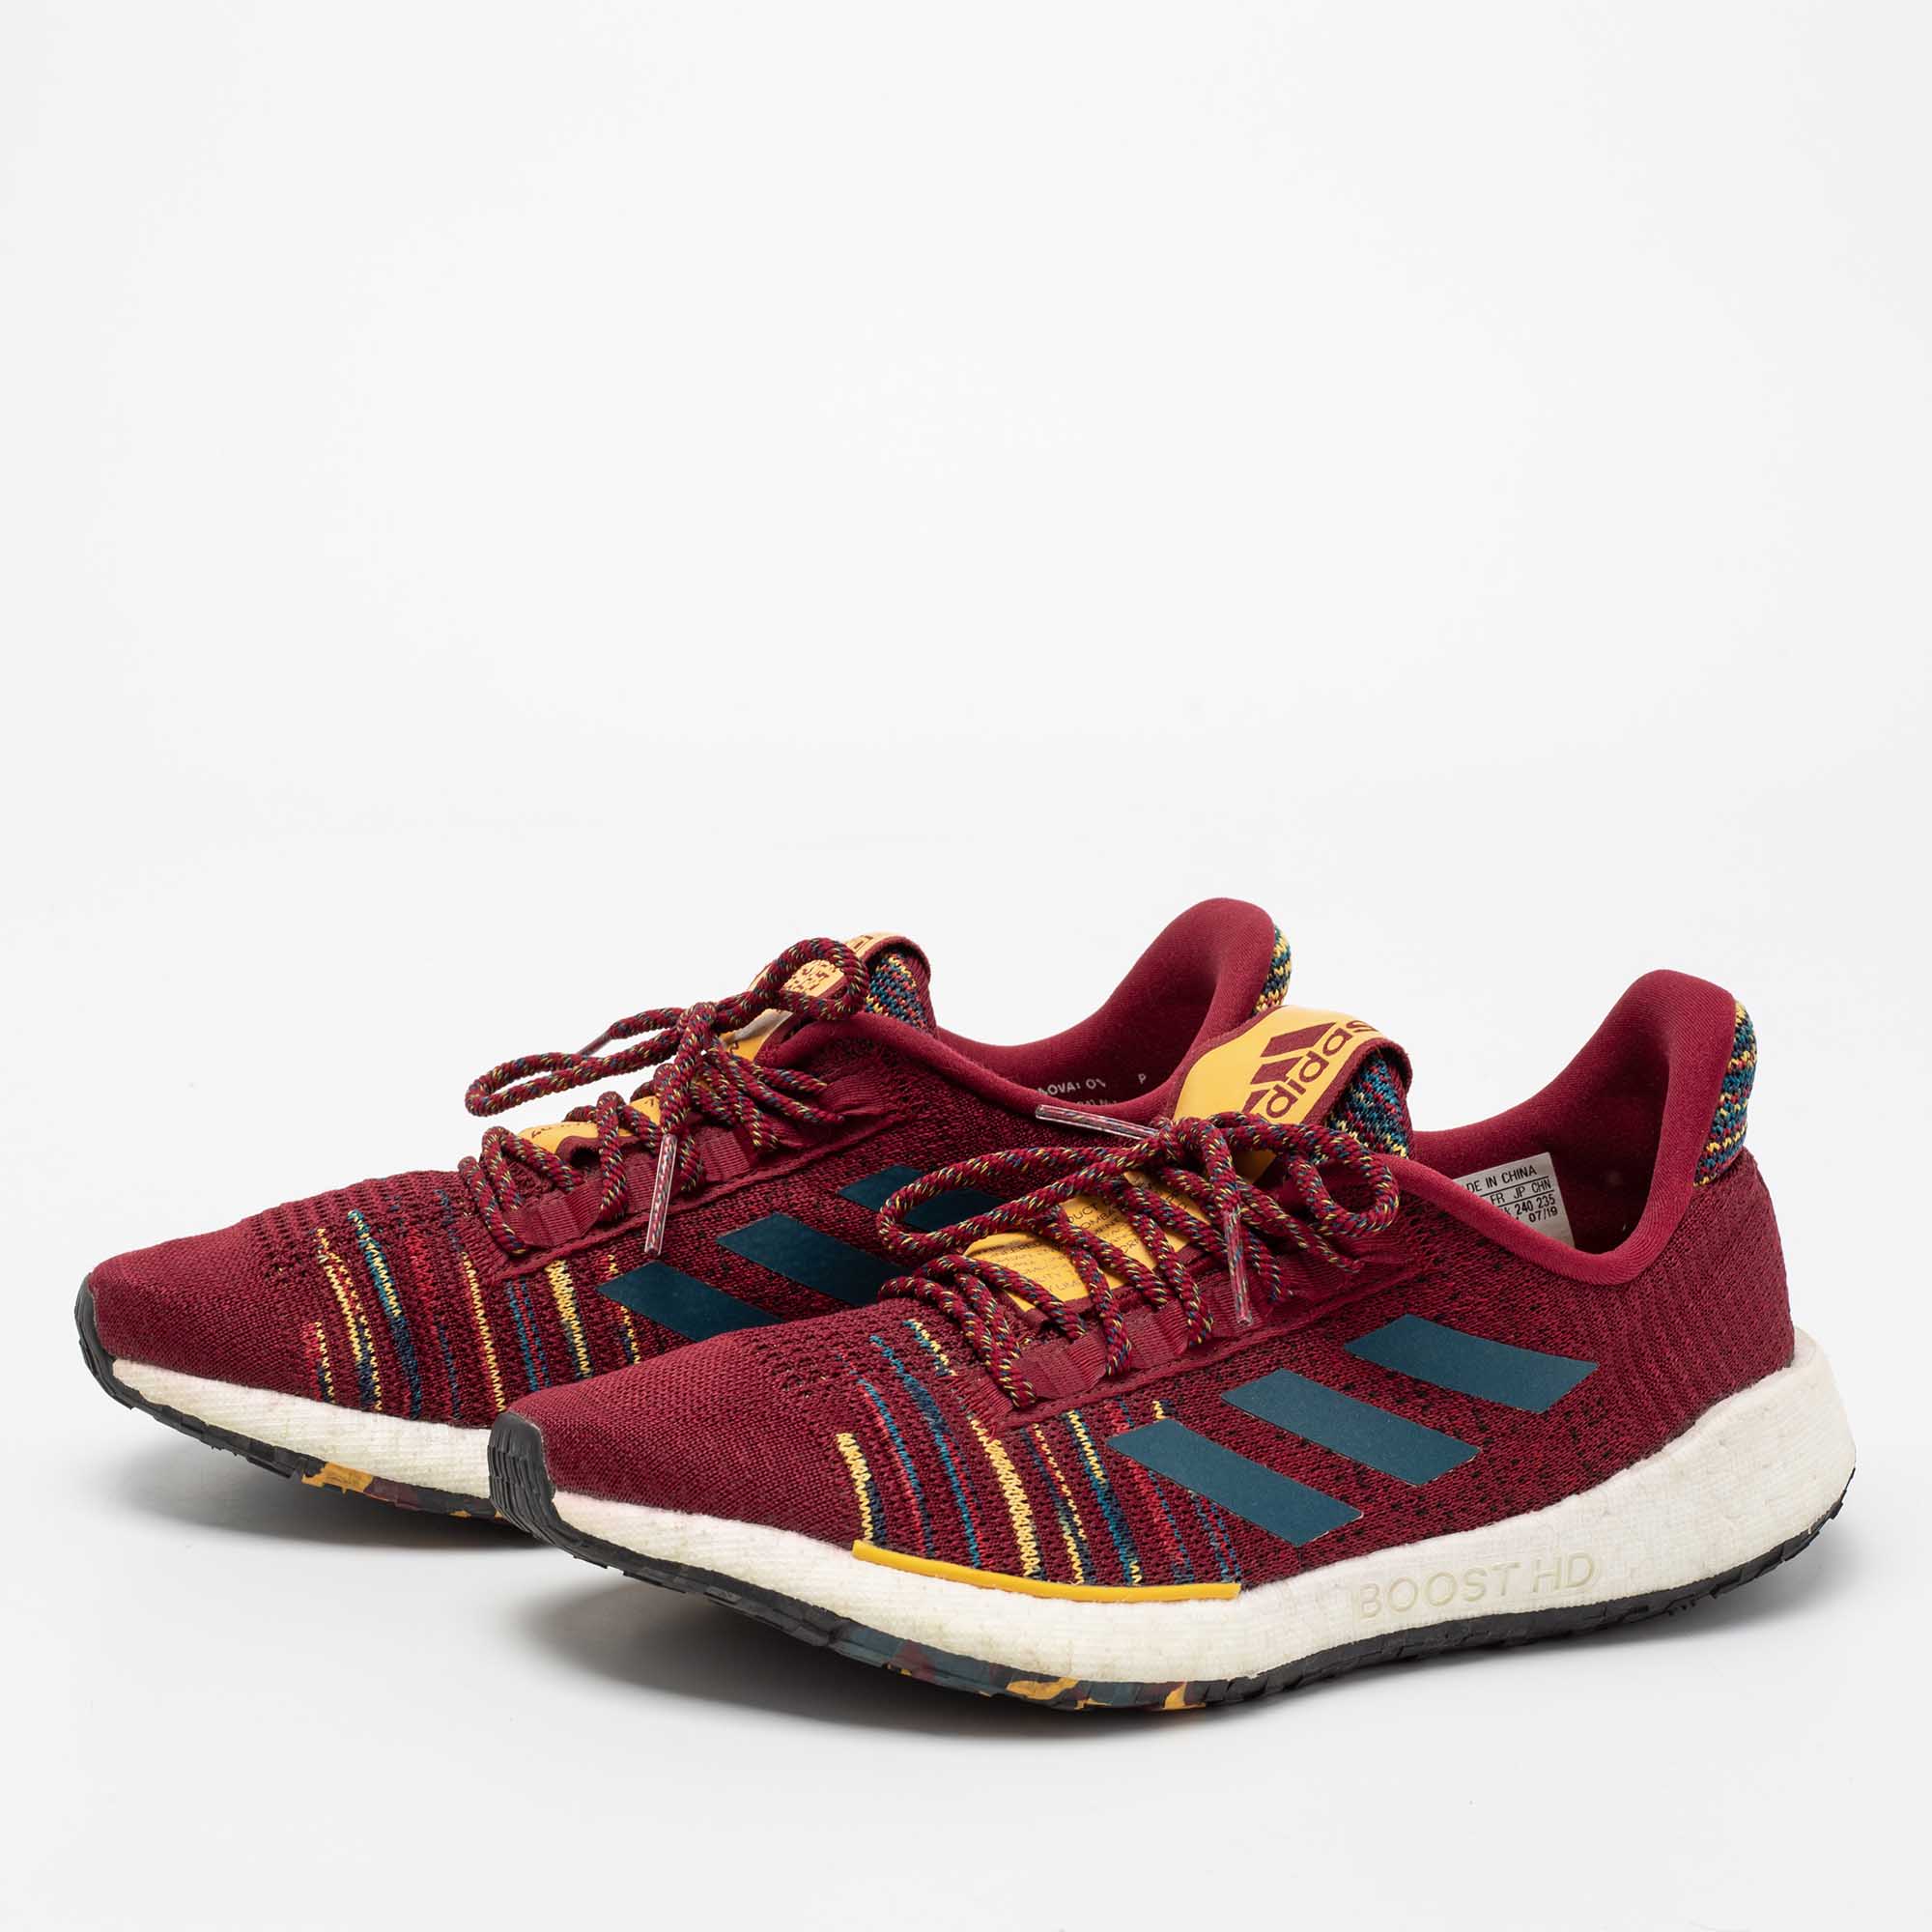 

Adidas x Missoni Burgundy Knit Fabric Pulseboost Low-Top Sneakers Size 38 2/3